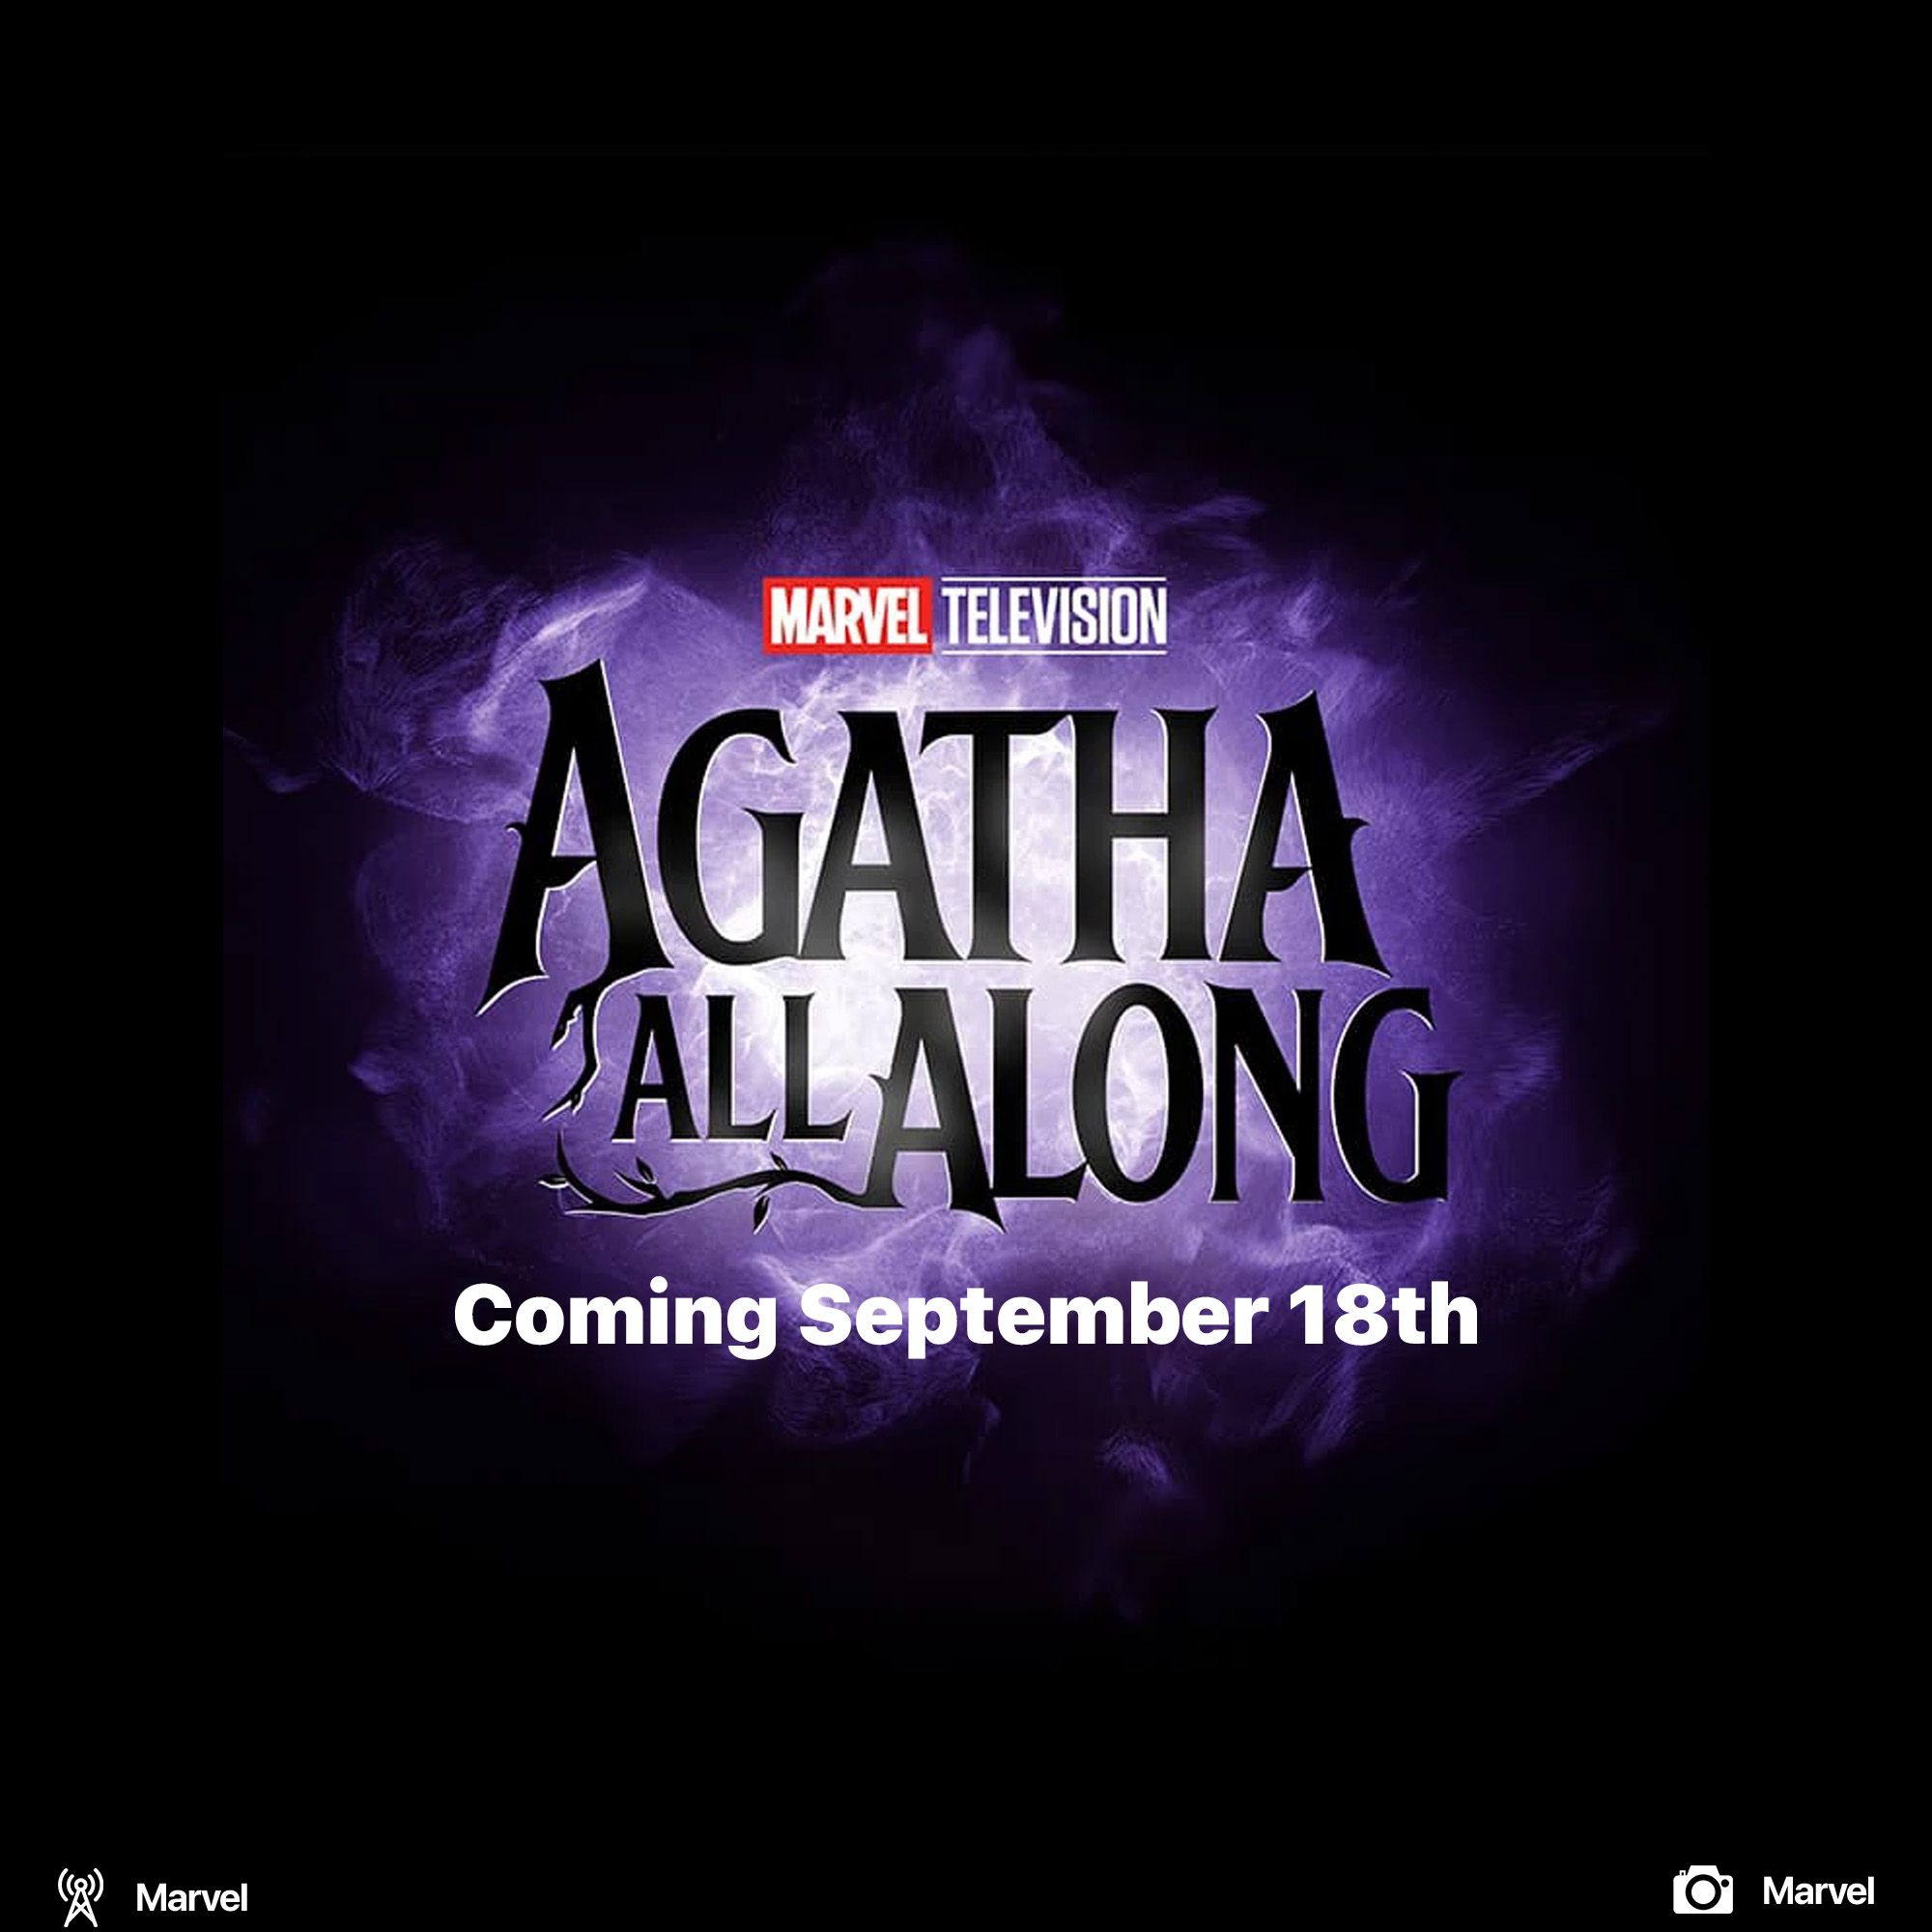 Agatha all along coming in September